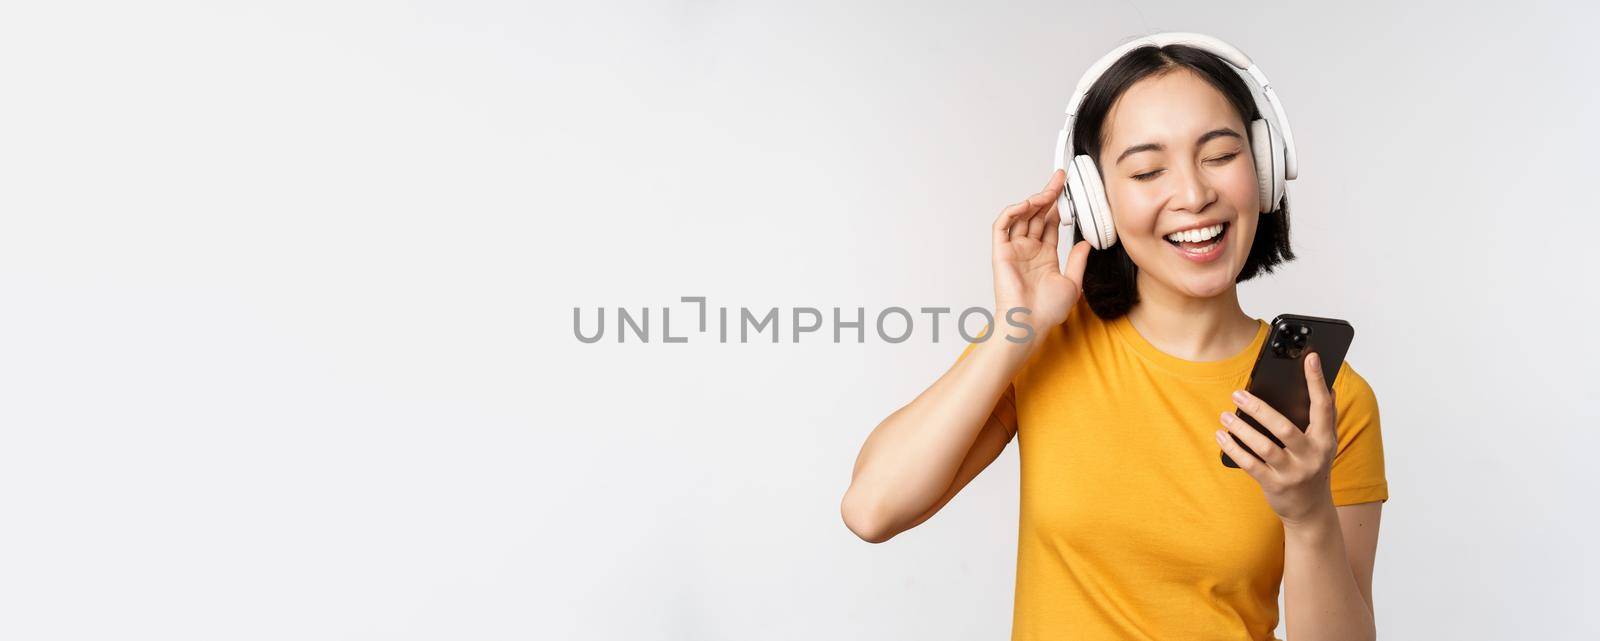 Cute japanese girl in headphones, looking at mobile phone and smiling, using music app on smartphone, standing against white background.